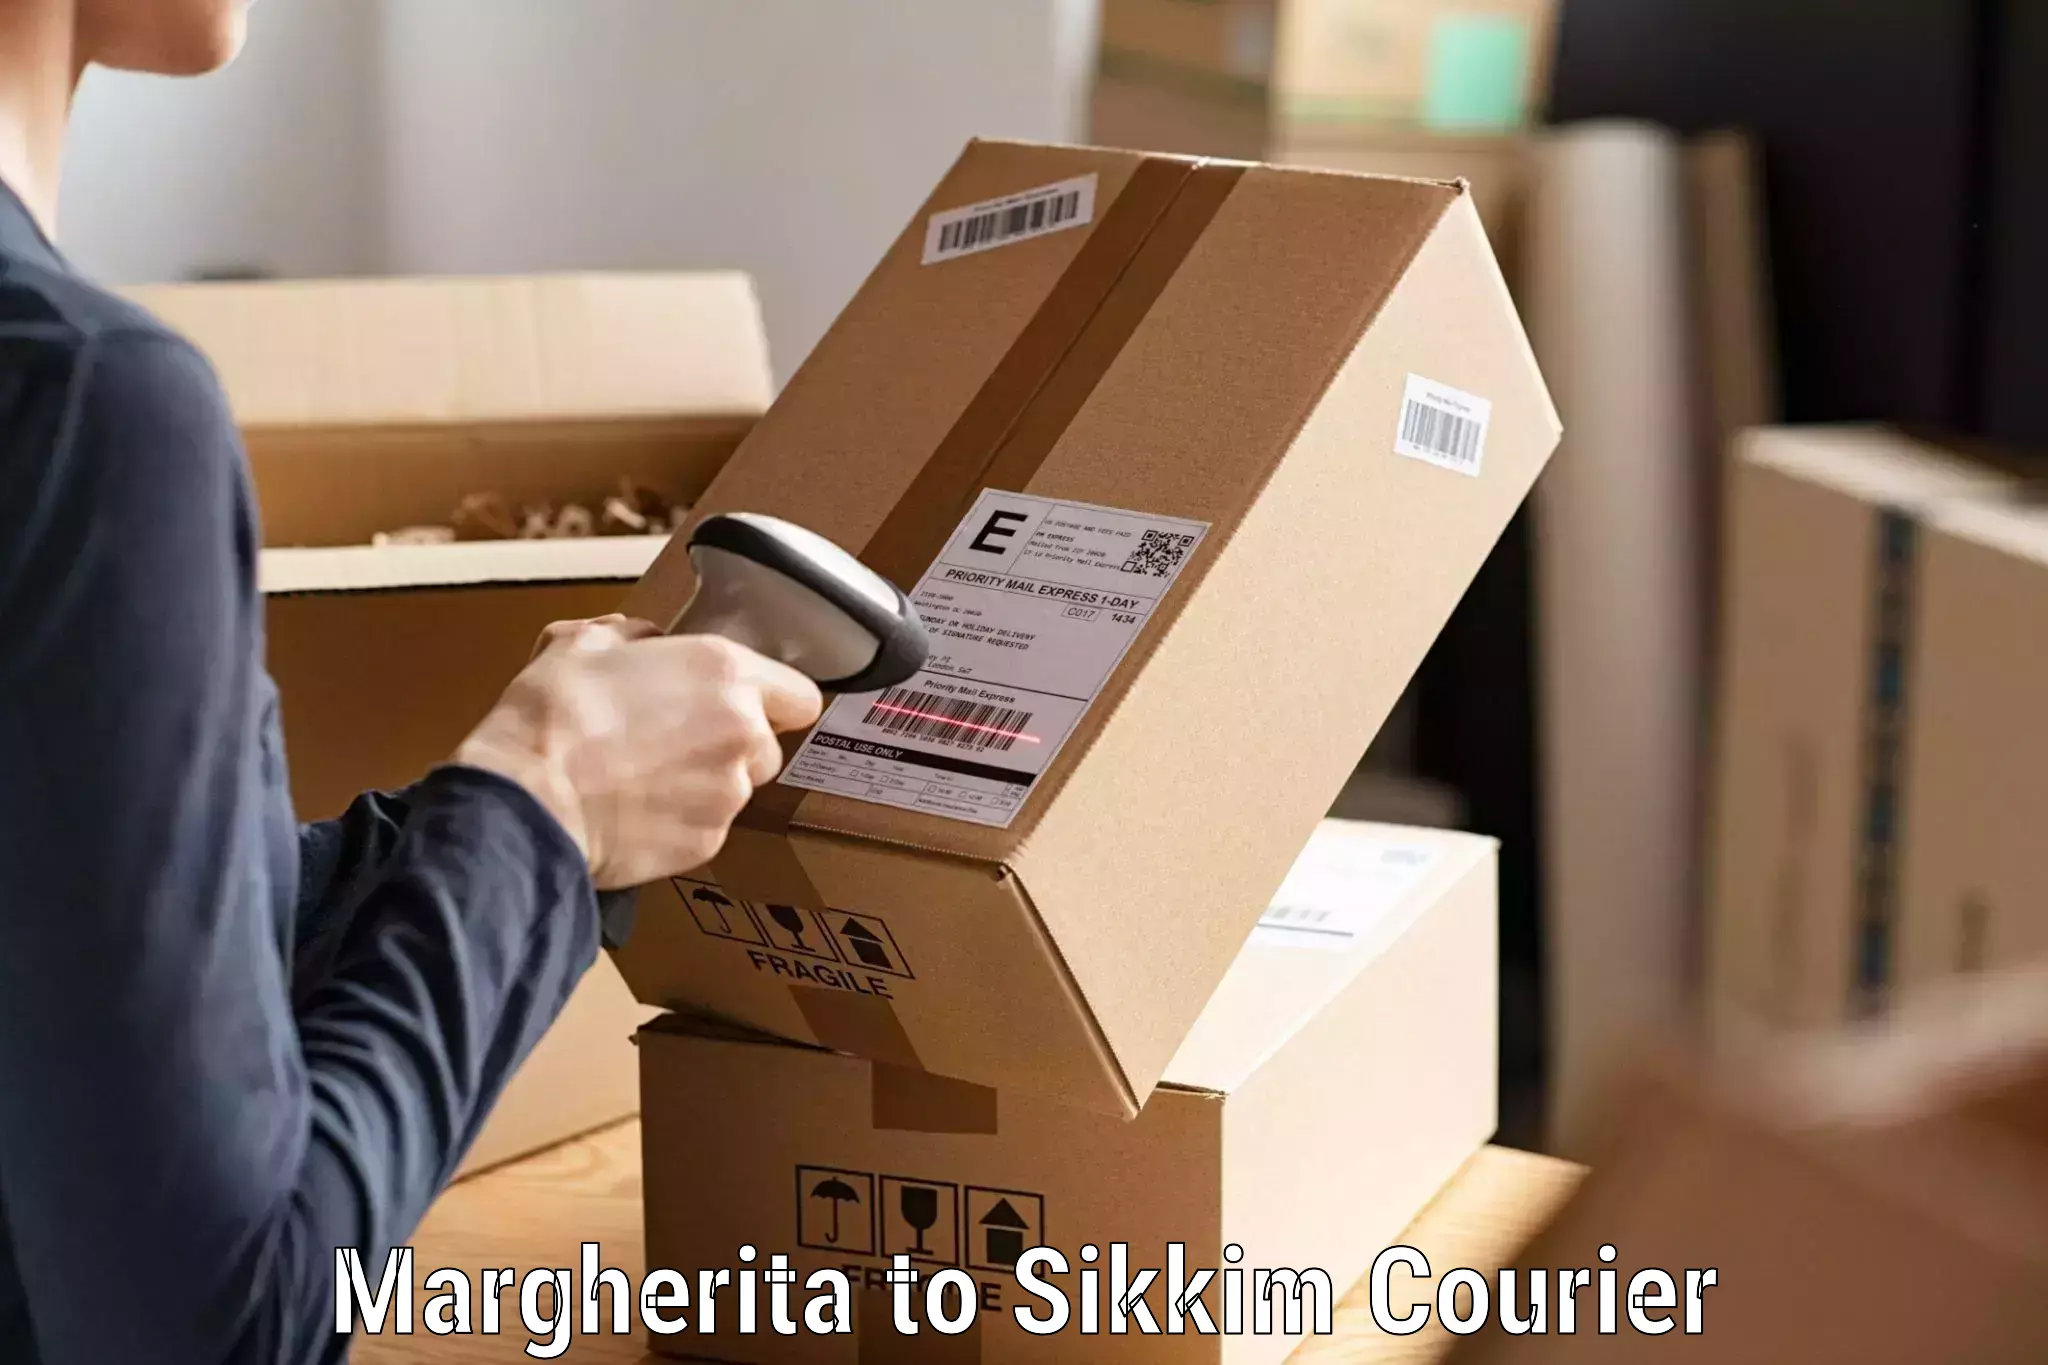 Cash on delivery service Margherita to Sikkim